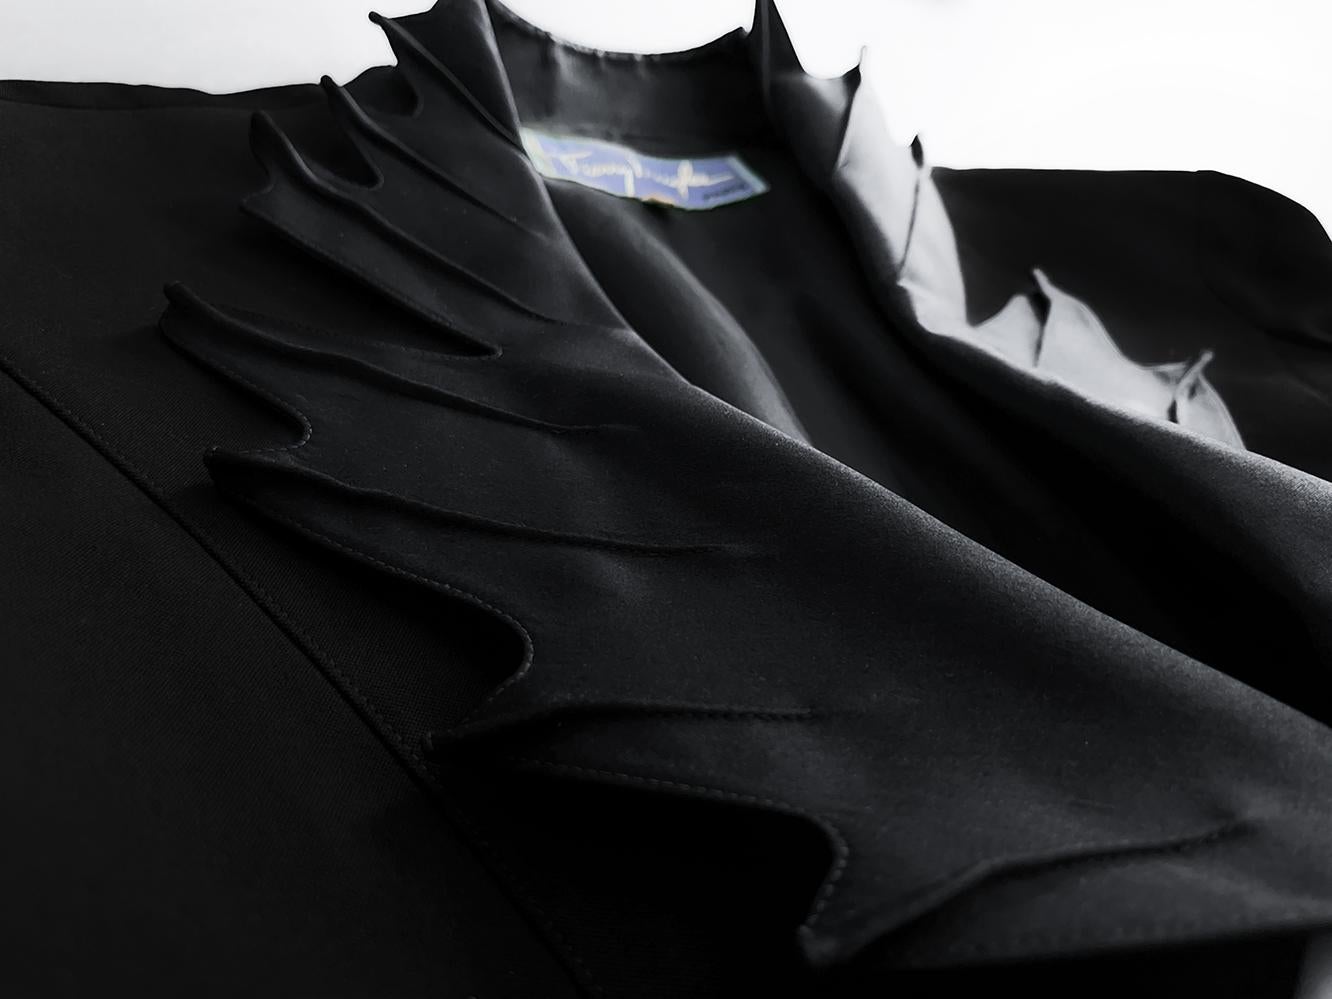 Dramatic Thierry Mugler FW1990 Archival Black Skirt Suit Sculptural For Sale 3